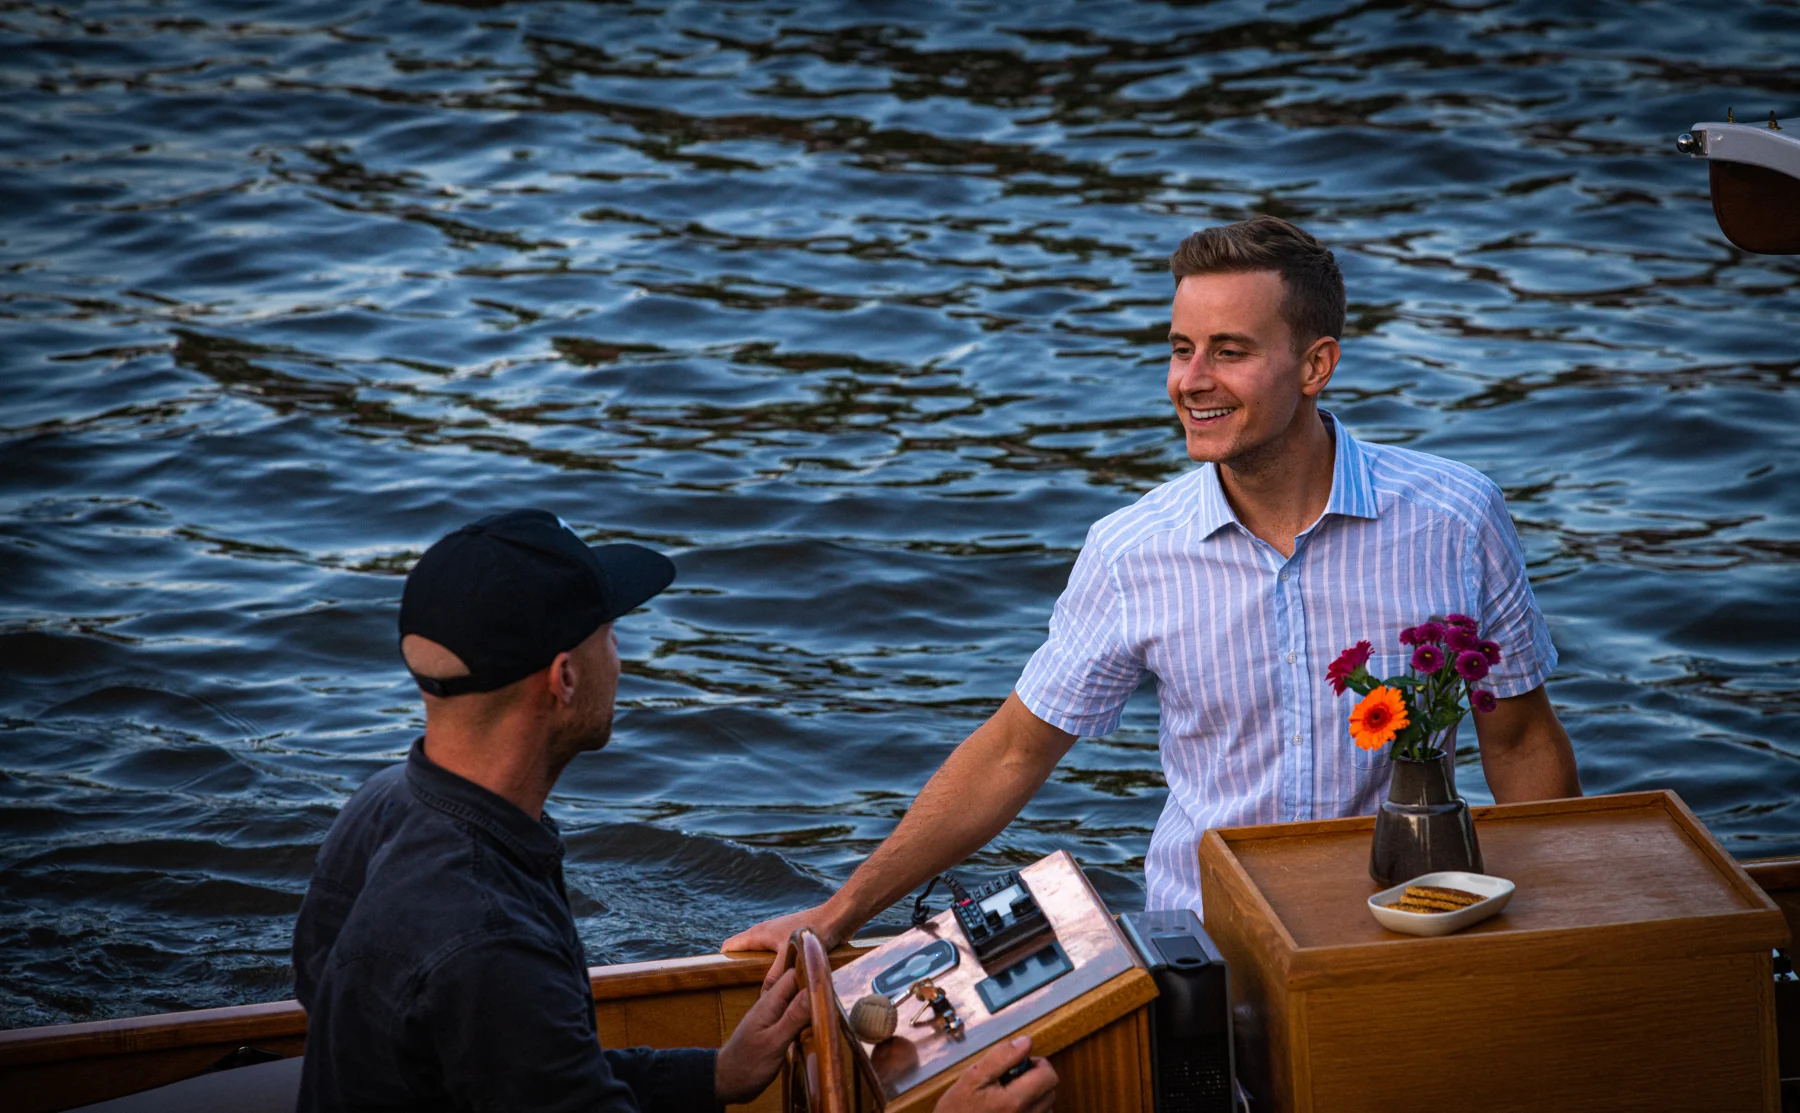 Unlimited Wine Tasting  in Historic Saloon Boat: A Cruise Through Amsterdam's Canals - 1284827